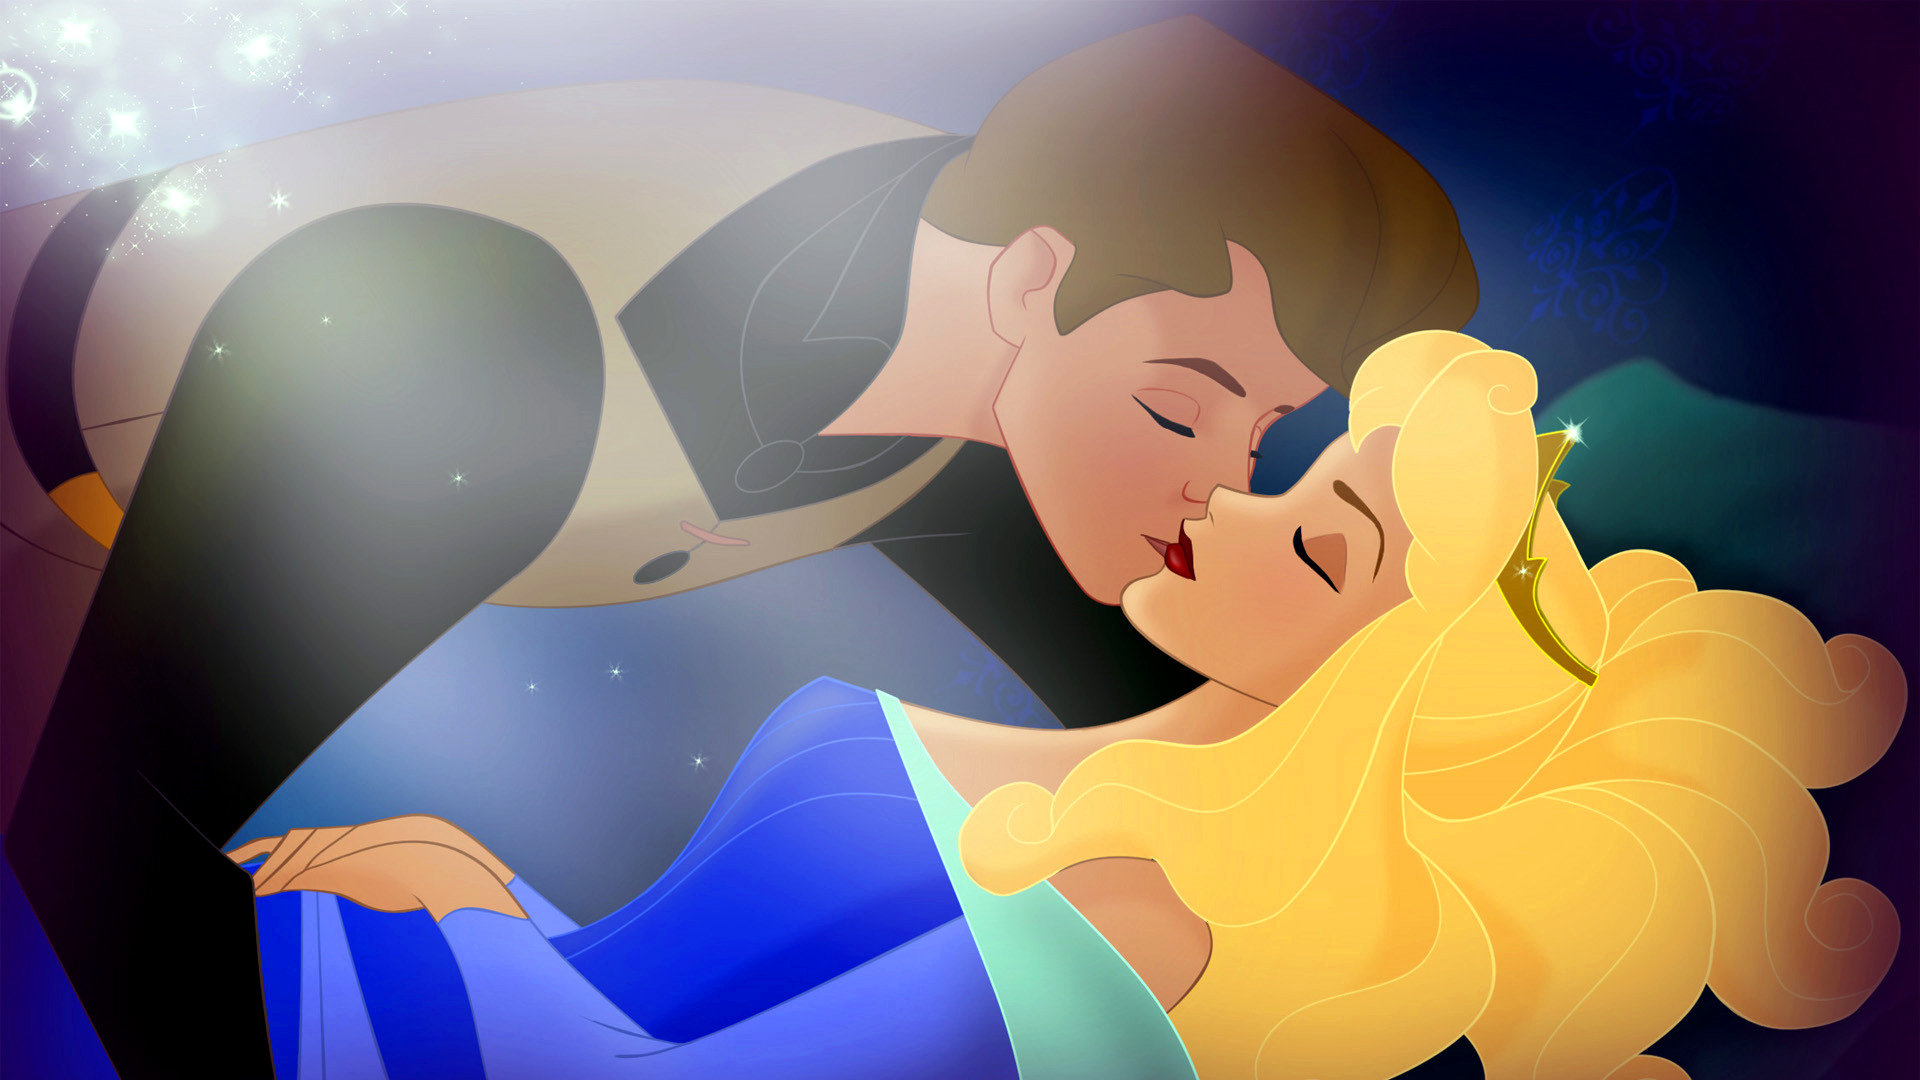 Download full hd 1920x1080 Sleeping Beauty PC background ID:24938 for free